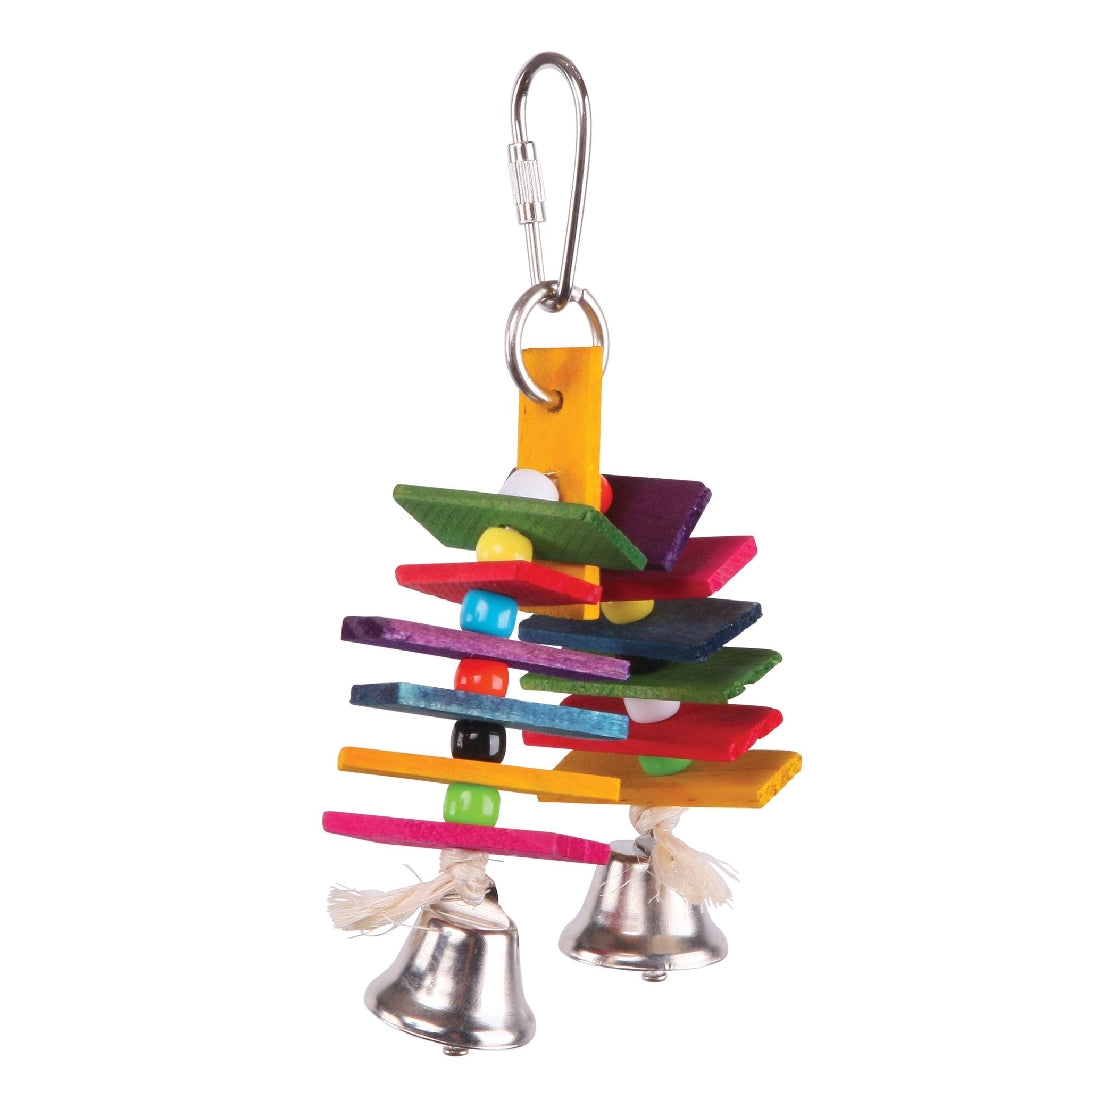 Multicolored wooden bird toy with bells on white background.